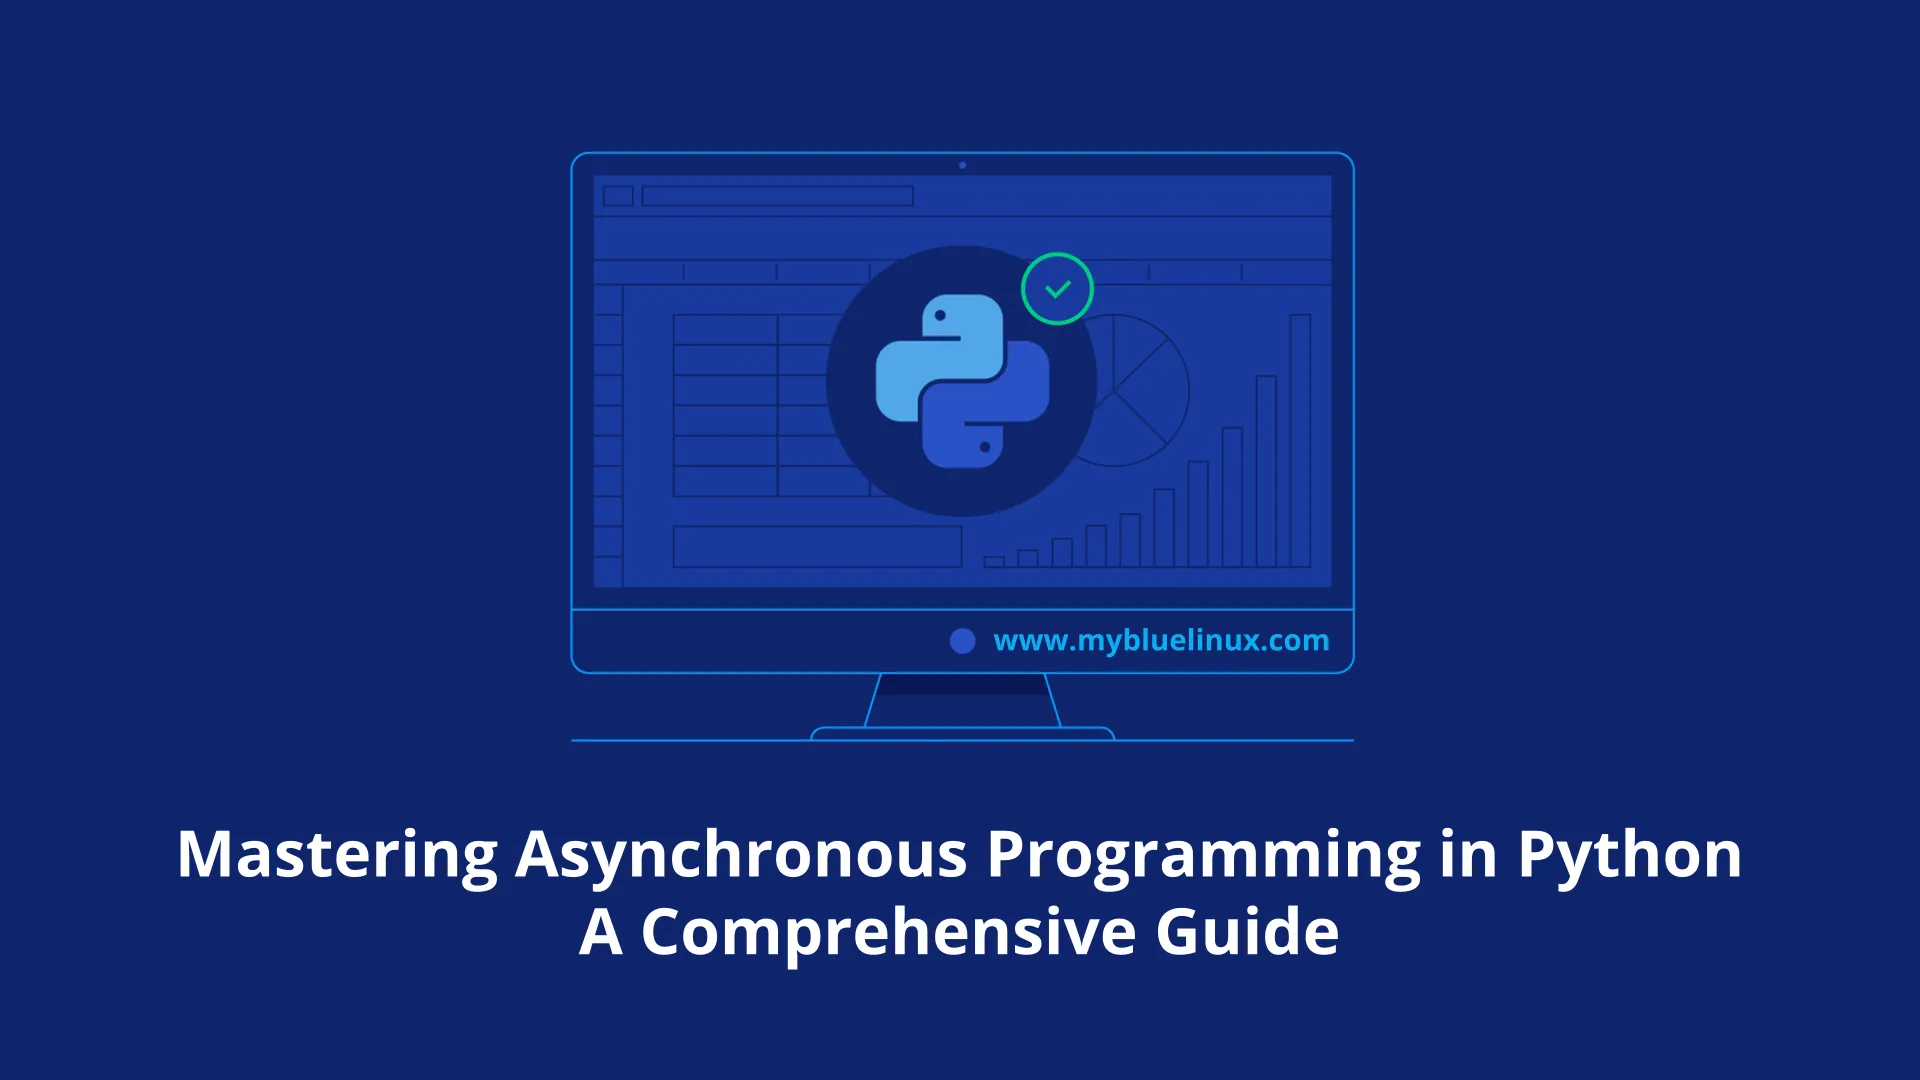 Mastering Asynchronous Programming in Python: A Comprehensive Guide